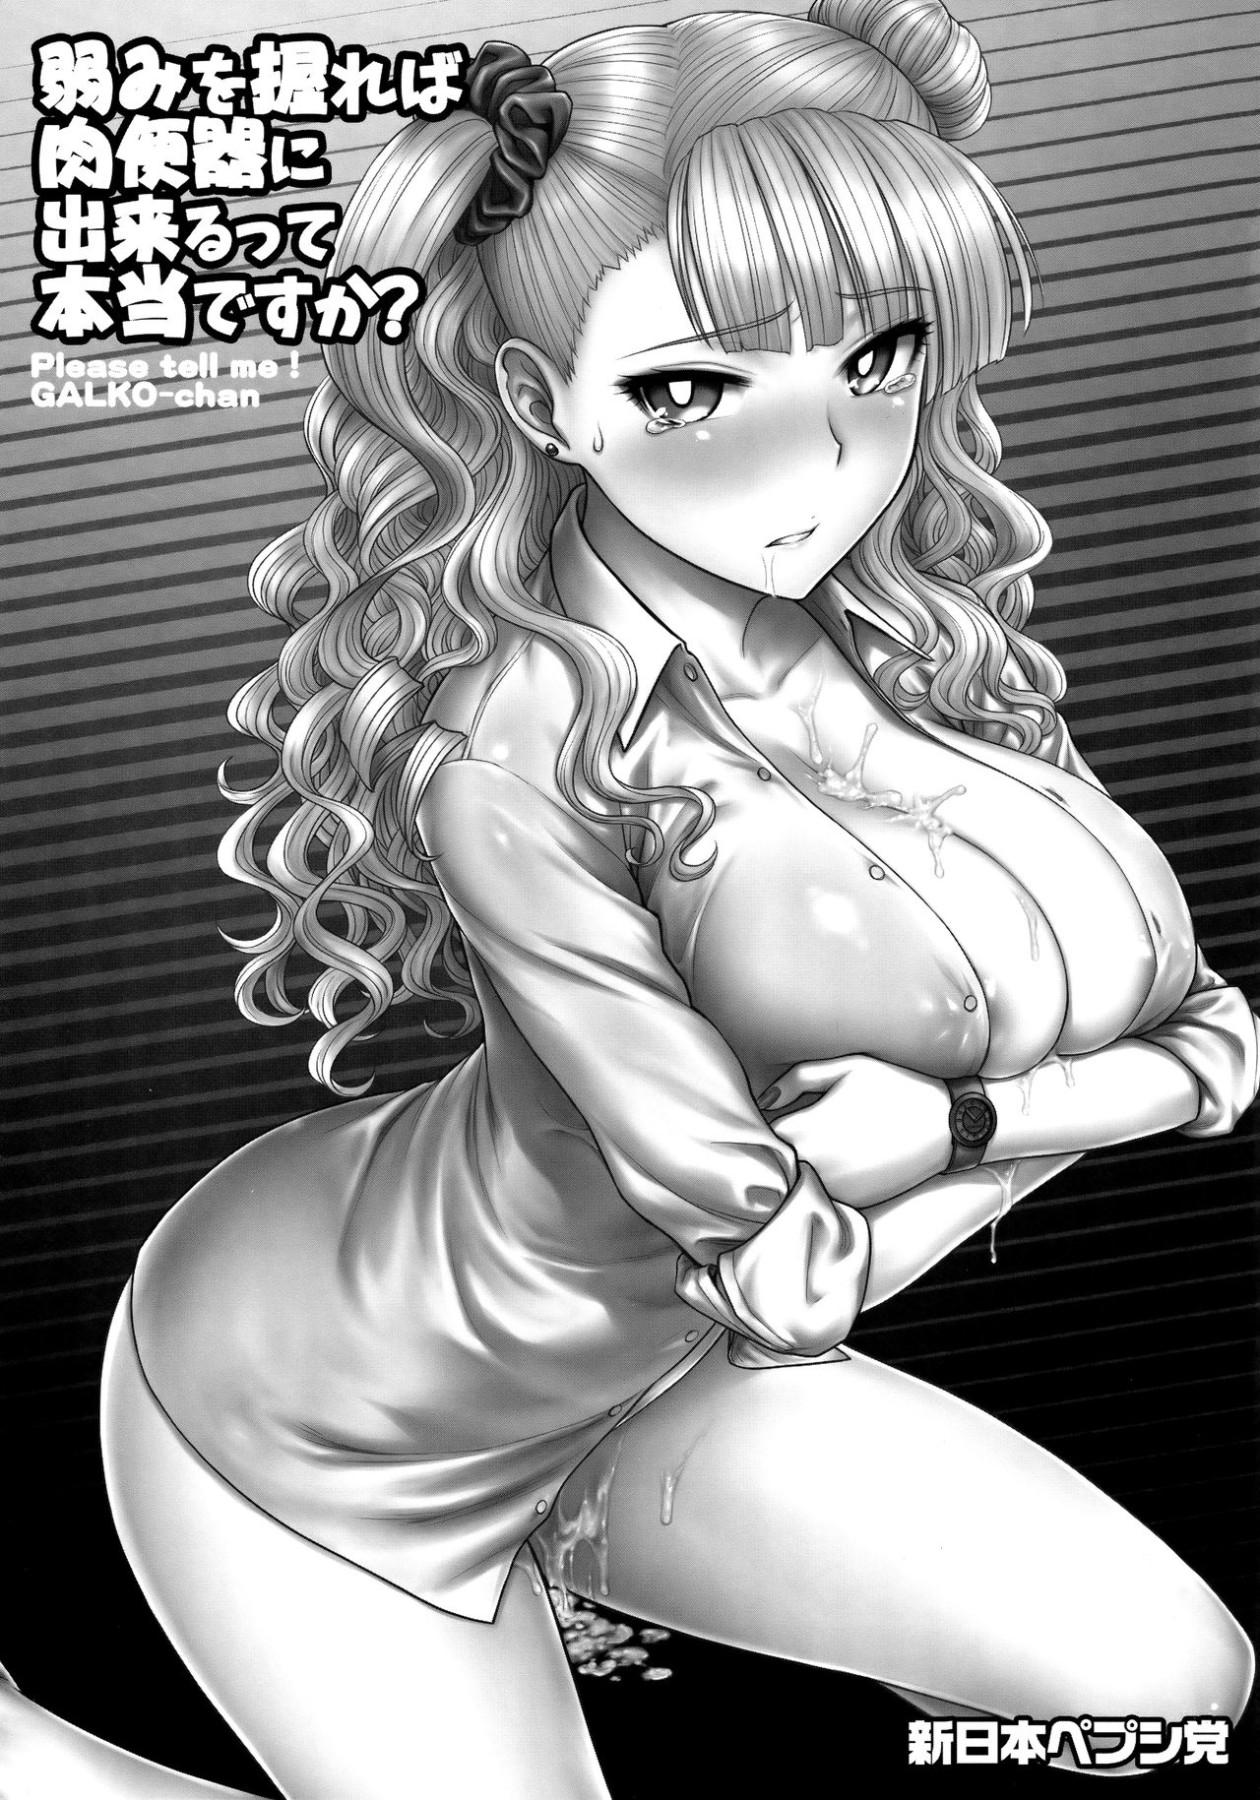 Hentai Manga Comic-Can You Make Her a Slut By Attacking Her Weakness?-Read-2